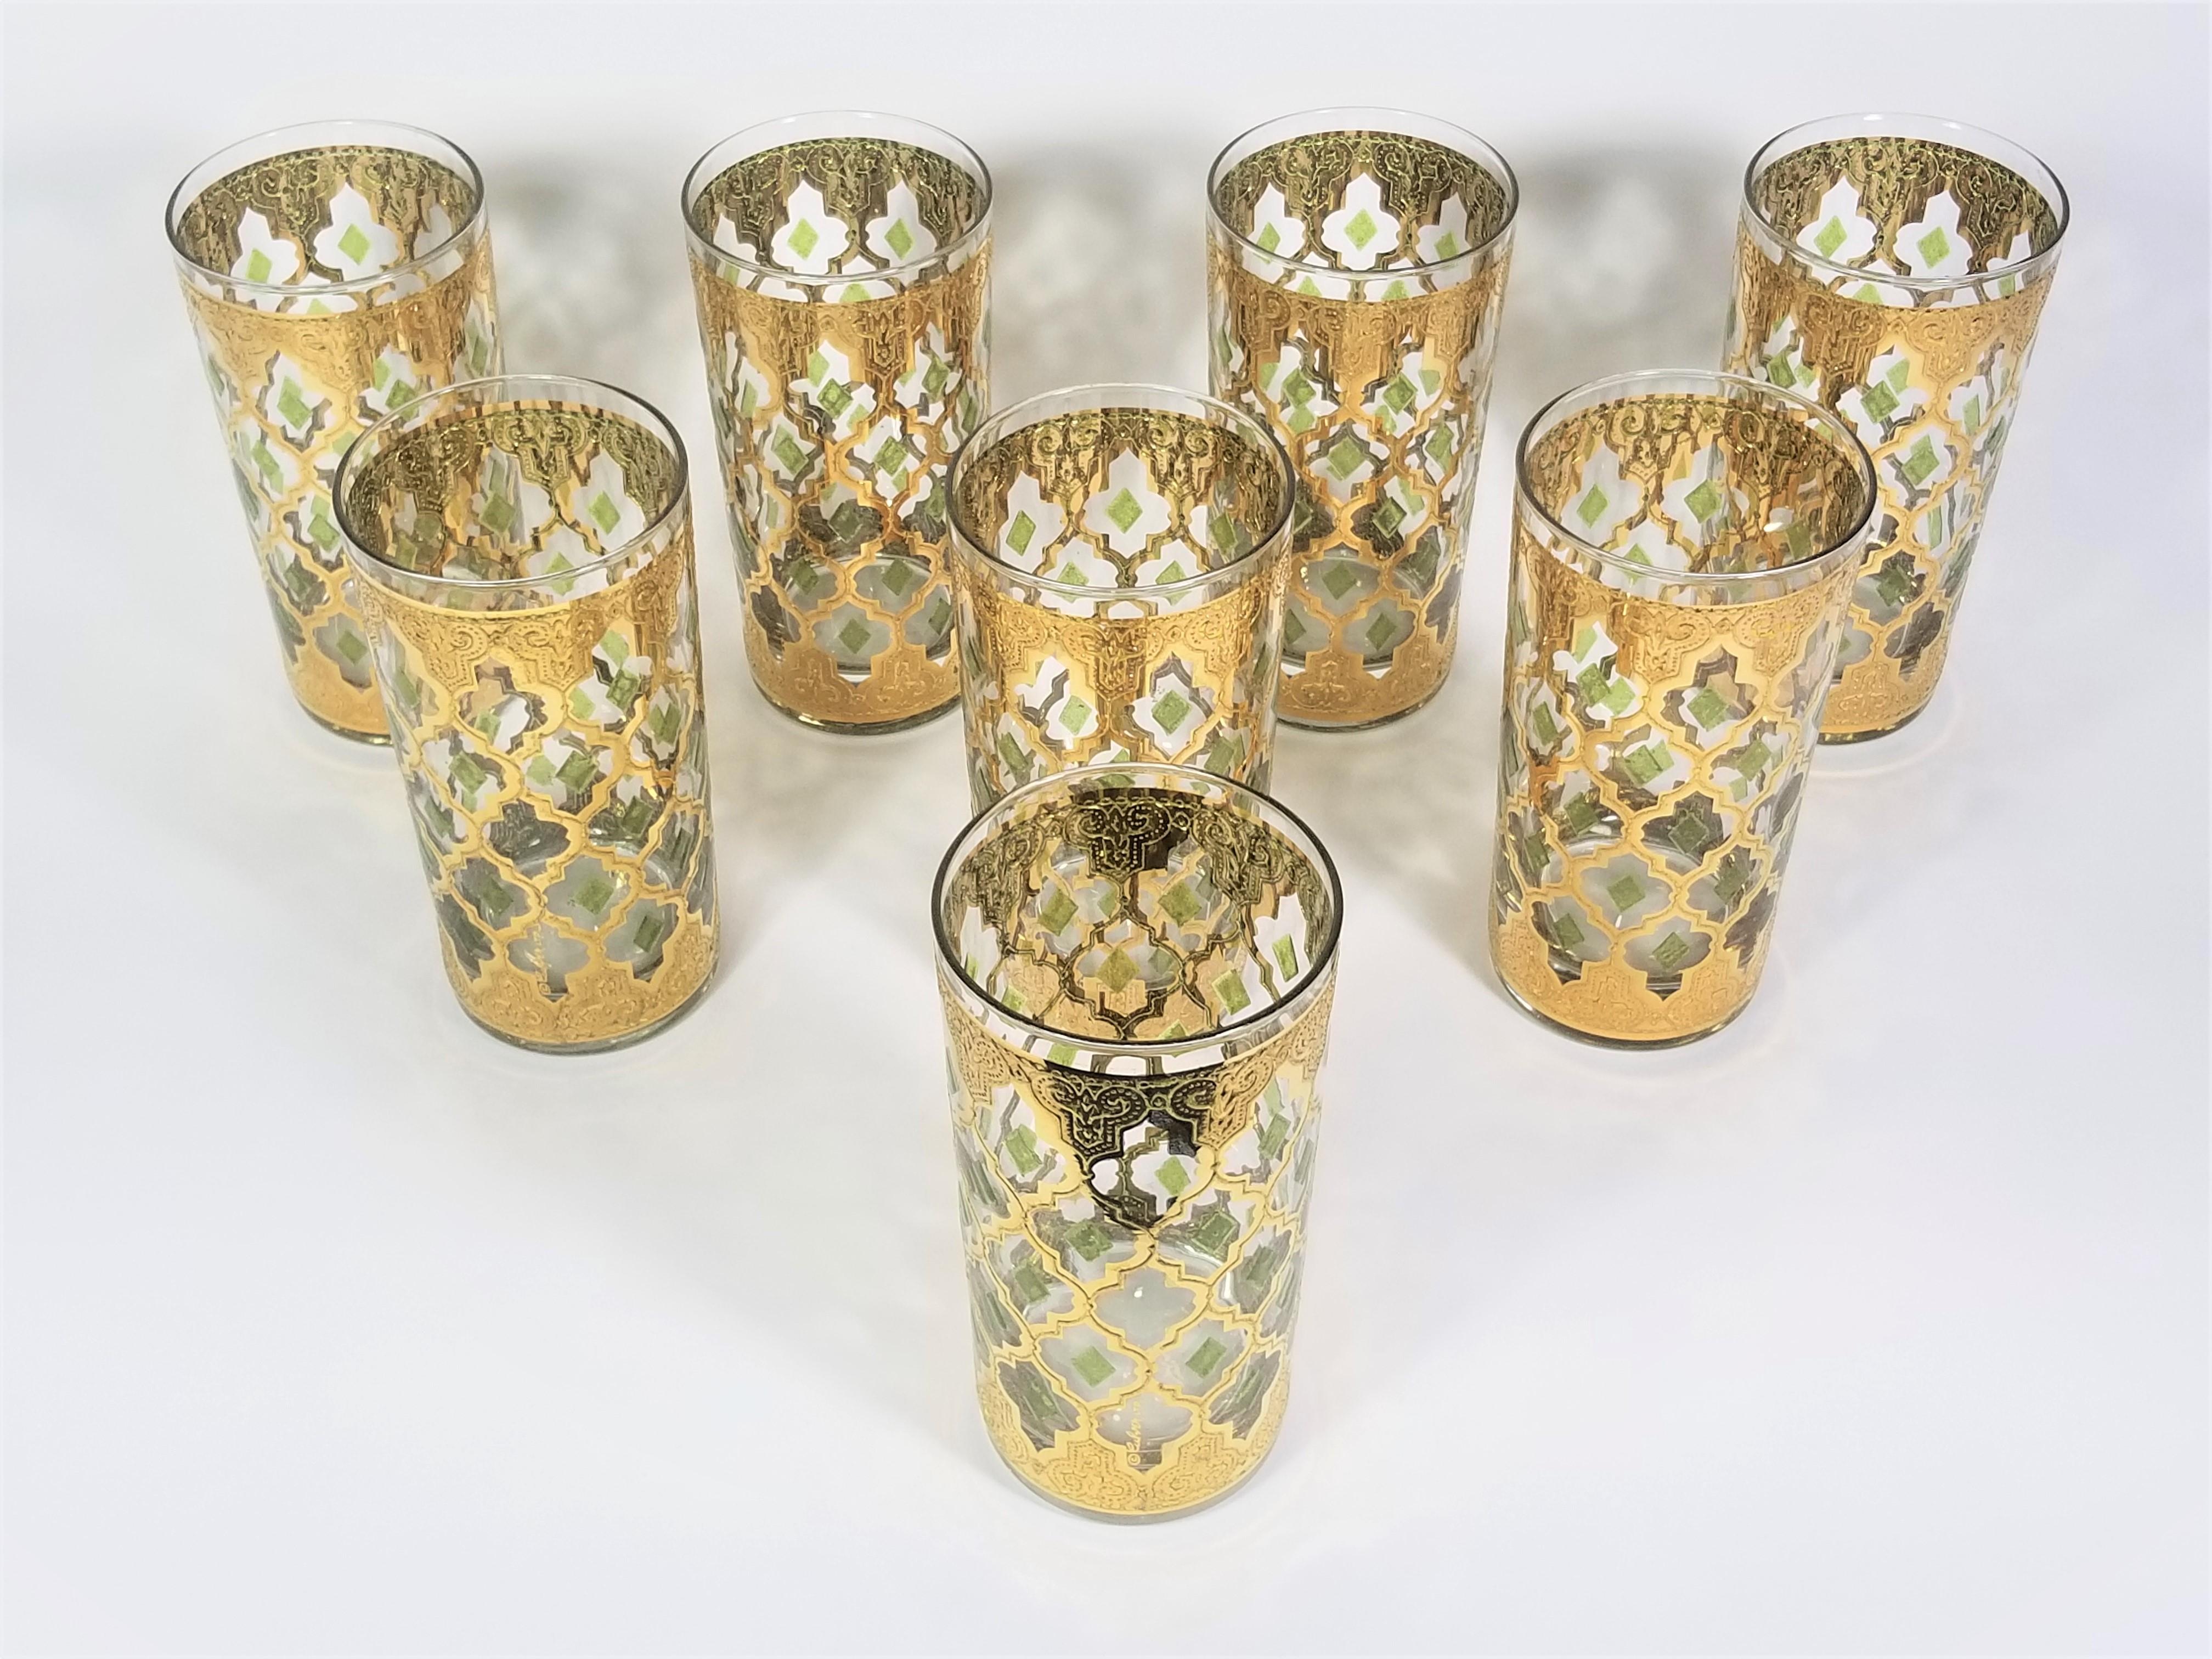 Culver 22k Gold Valencia Glassware Barware 1960s Mid Century Set of 8 or 16 In Excellent Condition For Sale In New York, NY